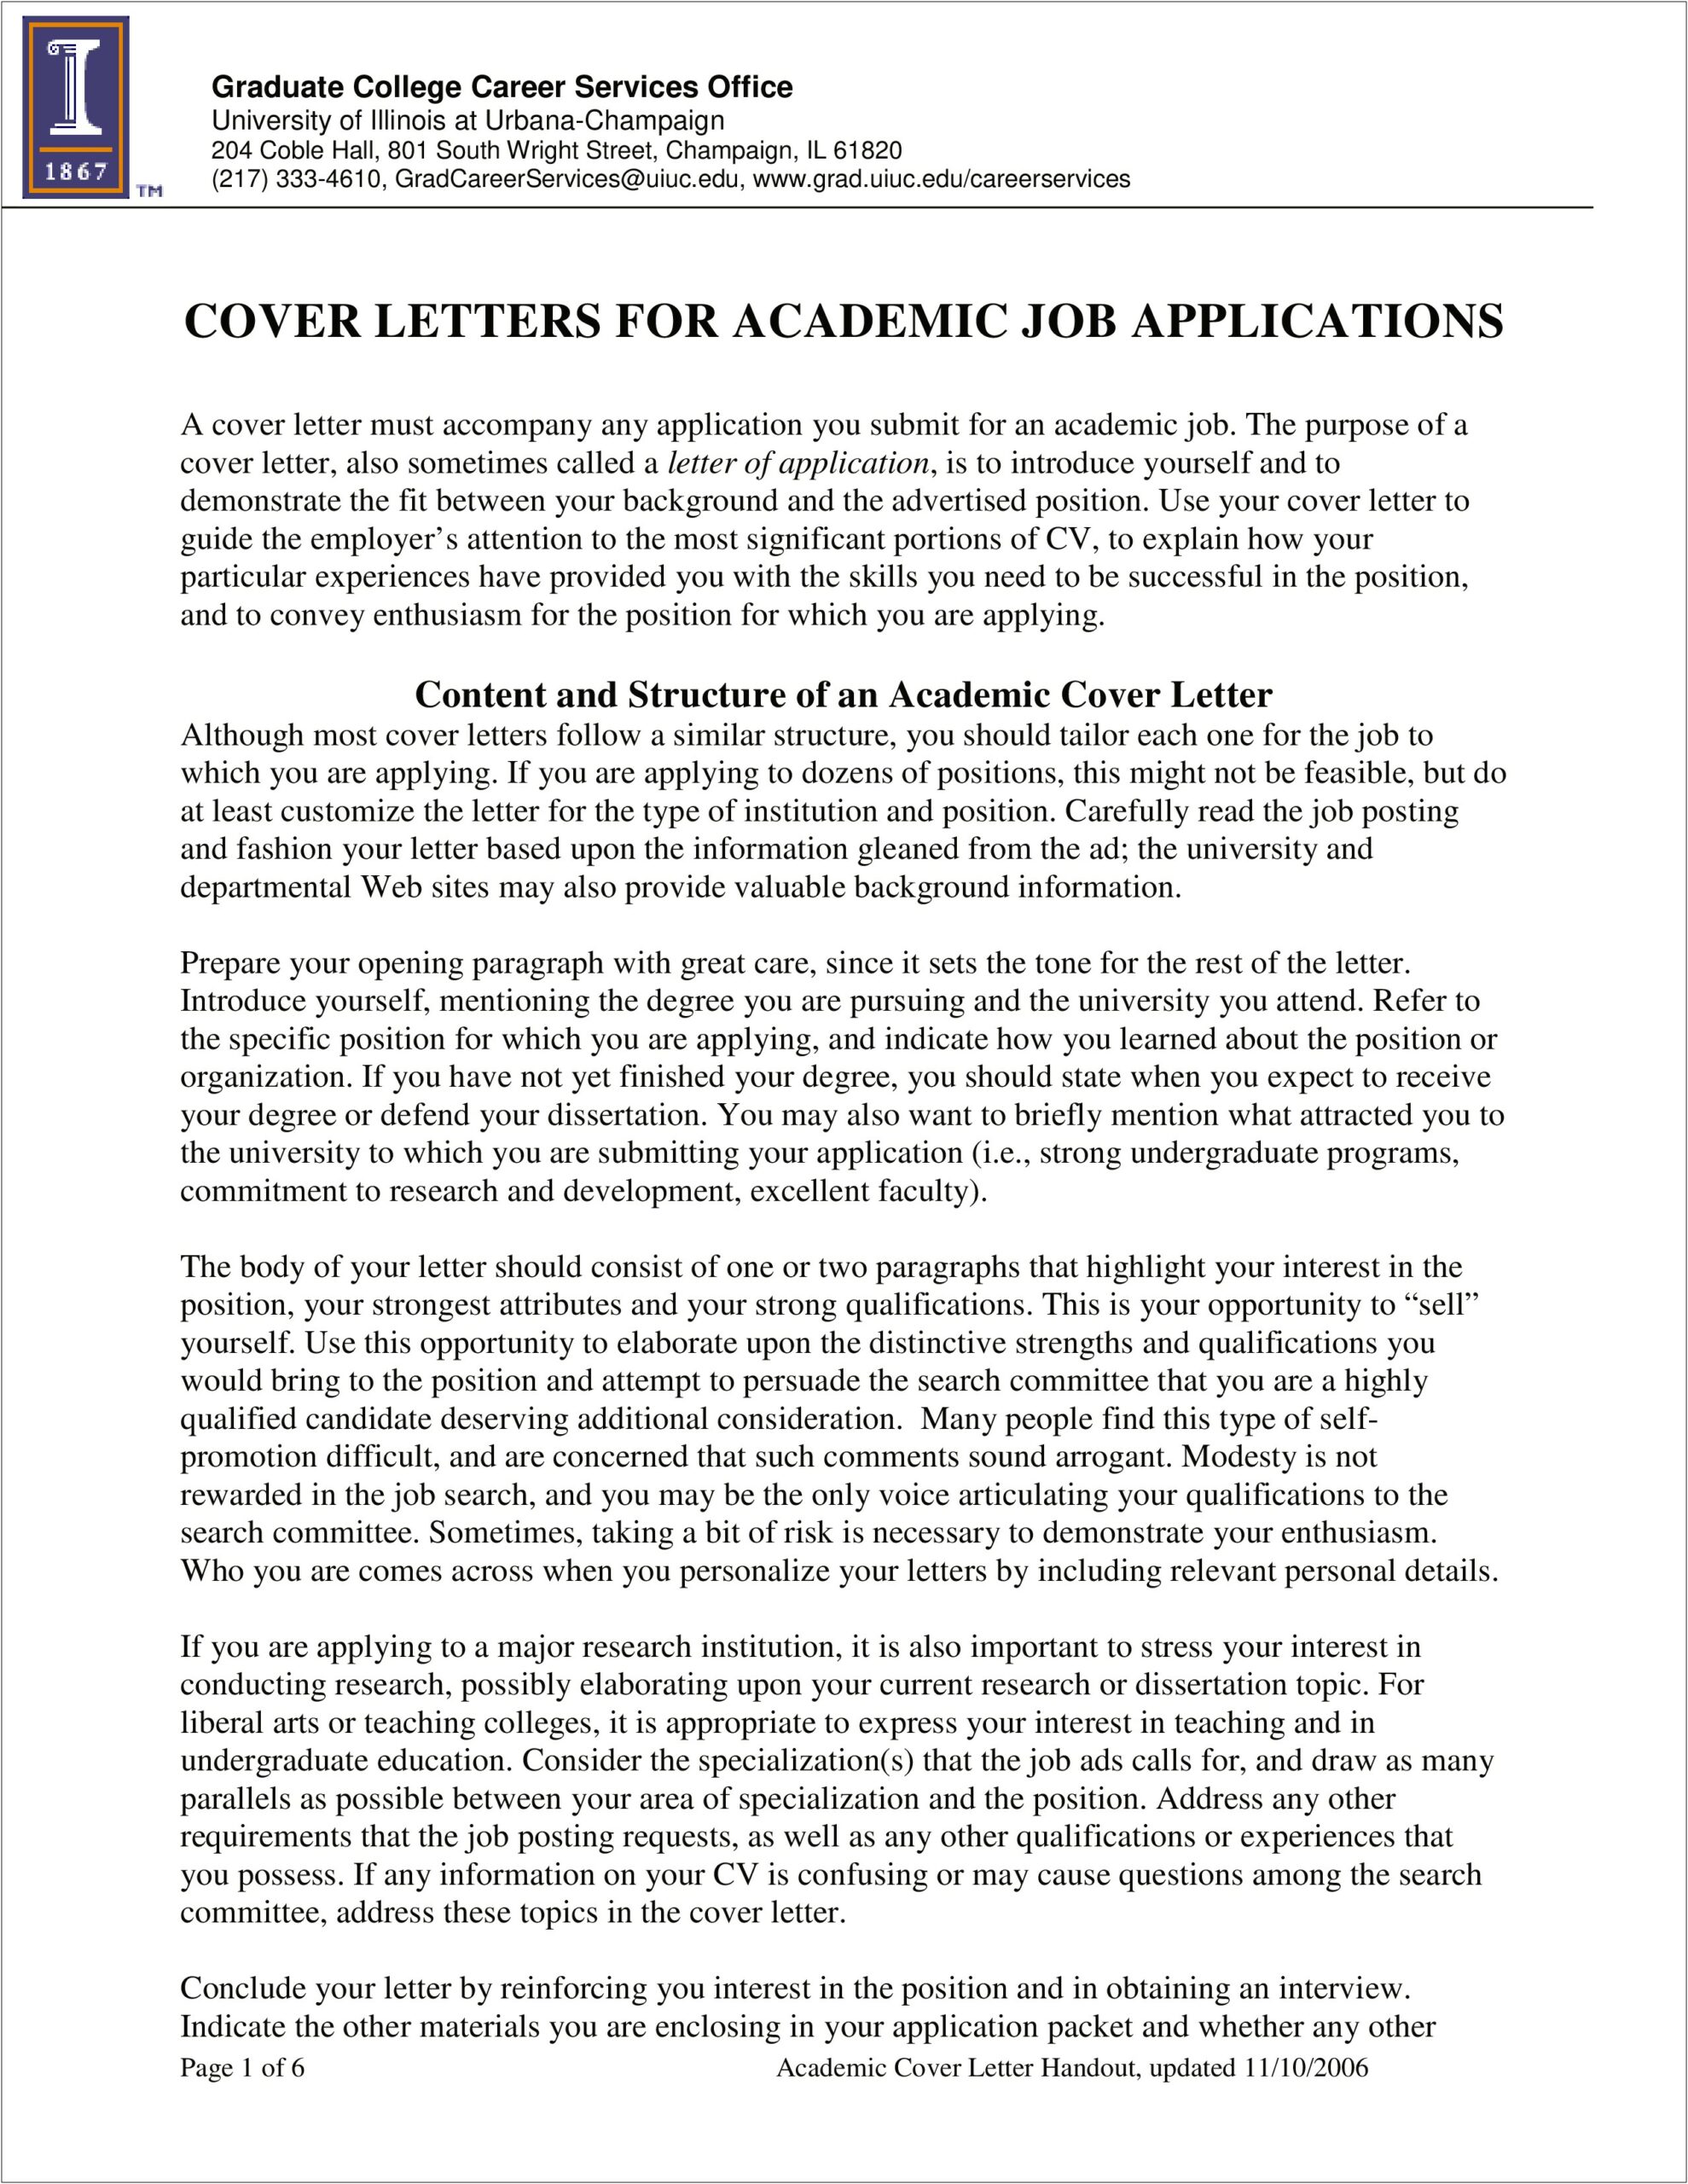 Free Downloadable Template Cover Letter University Job